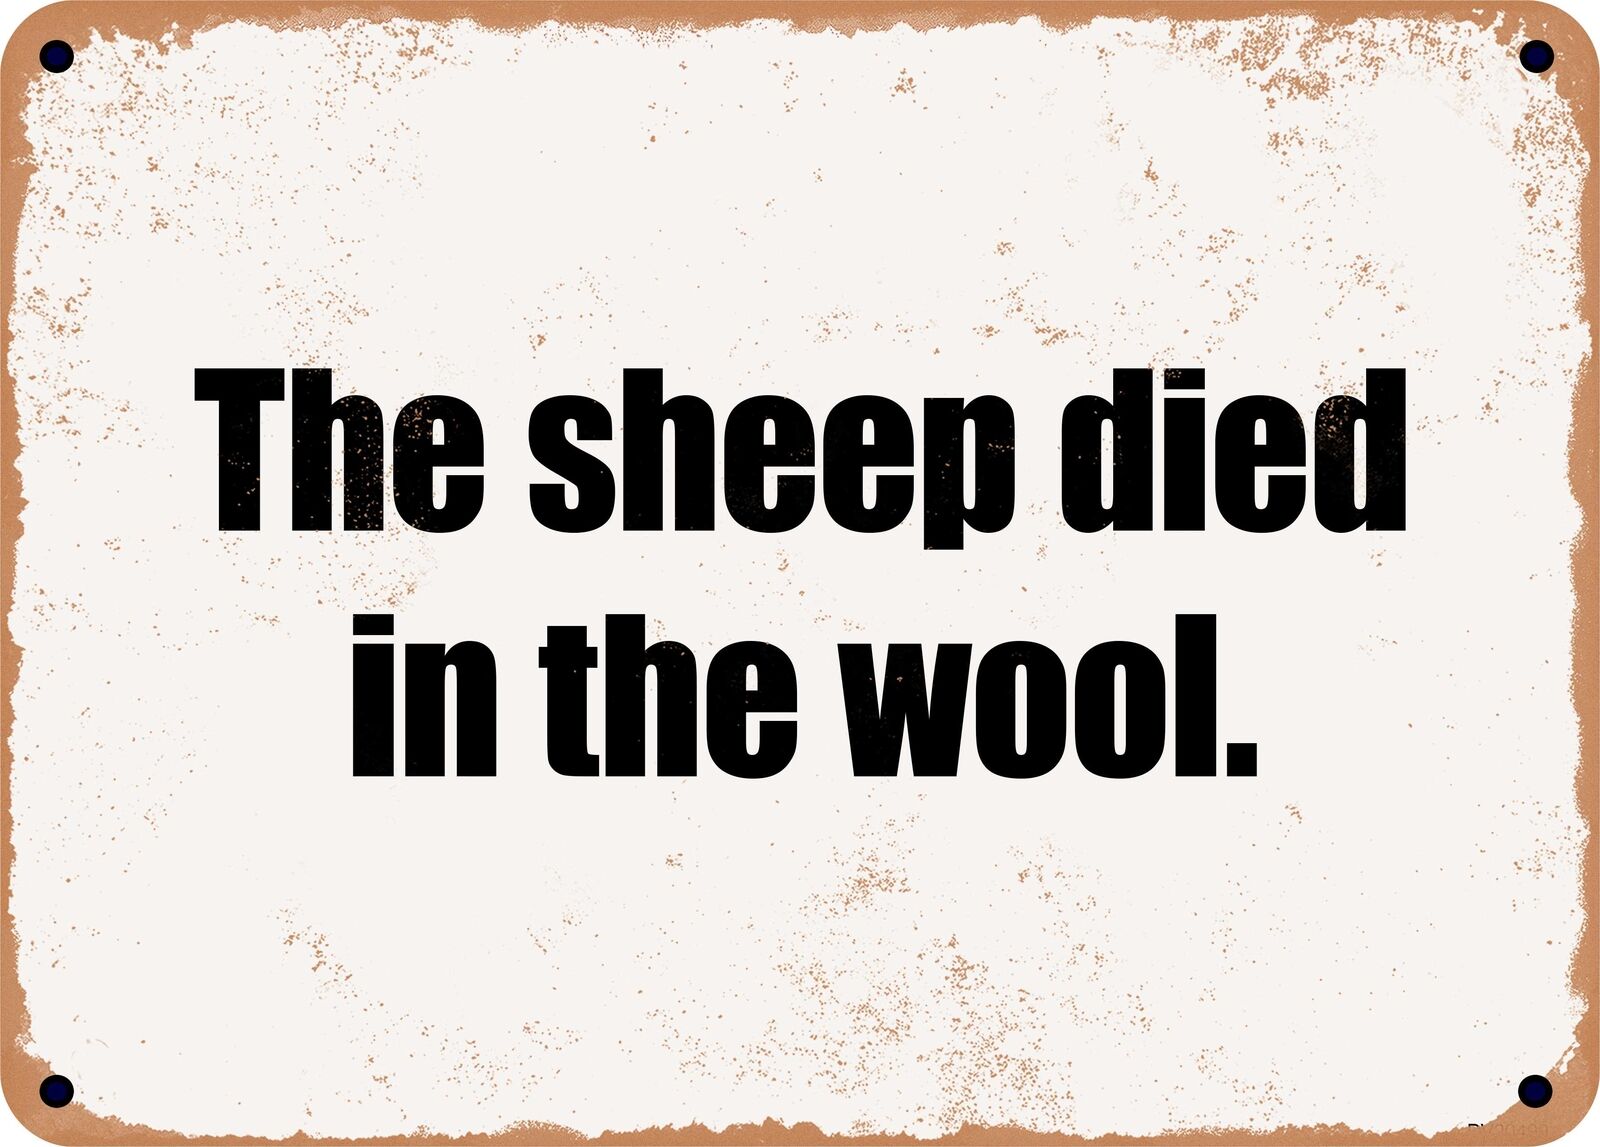 METAL SIGN - The sheep died in the wool.